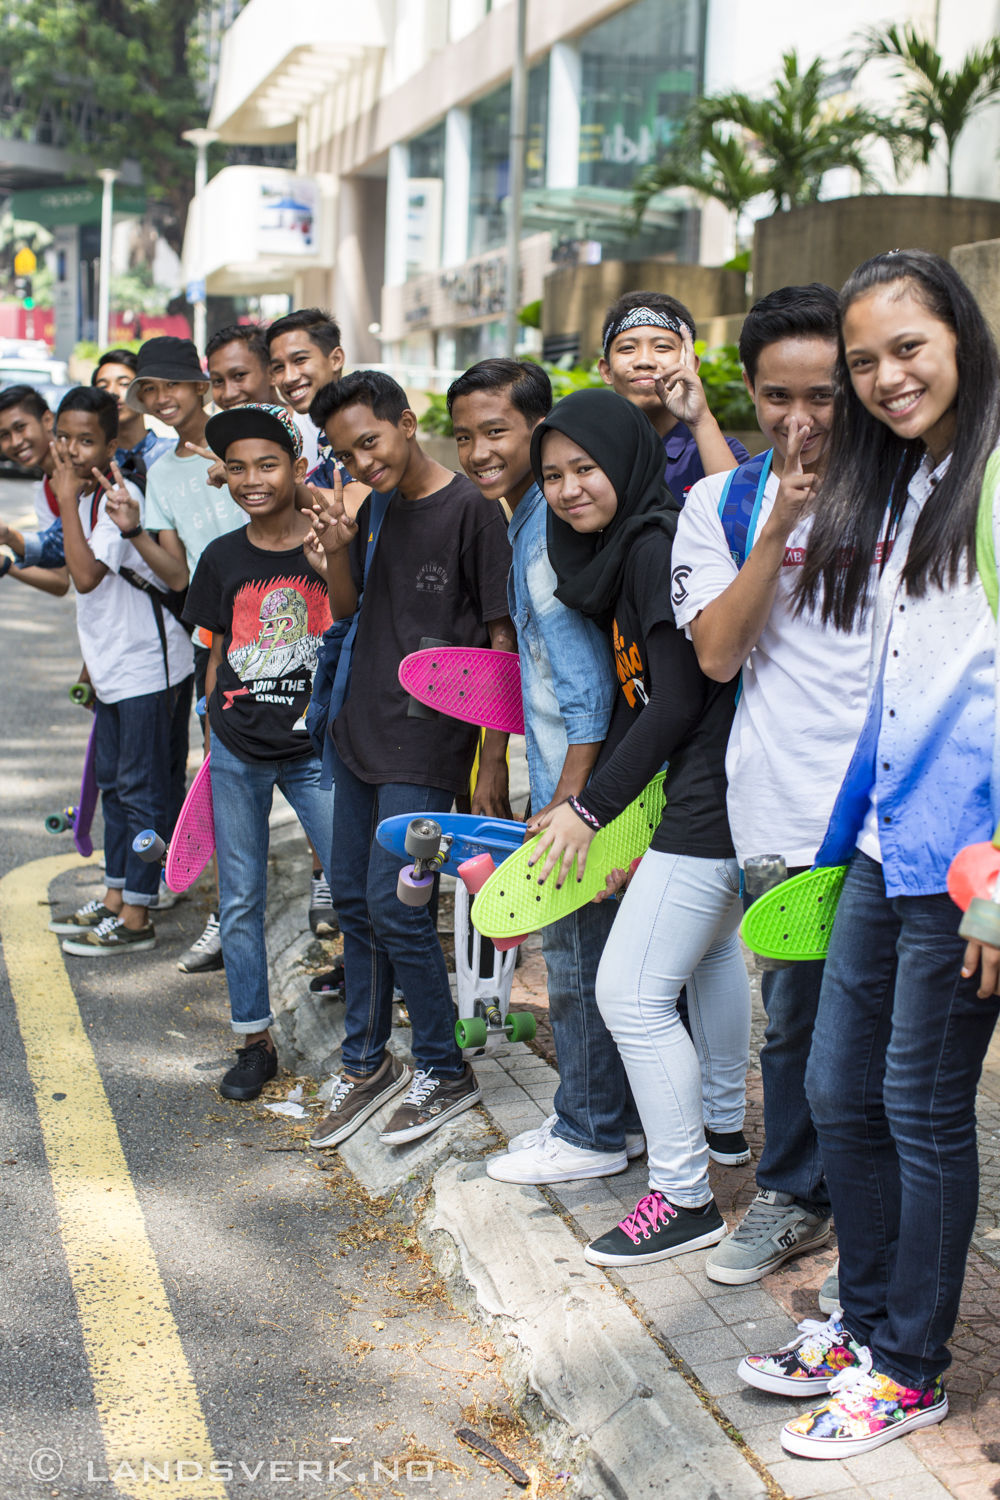 We were walking past a few kids skating in the streets when suddenly they whistled at us. I turned around and they were all lined up for a shot! Kuala Lumpur, Malaysia.

(Canon EOS 5D Mark III / Canon EF 50mm f/1.2 L USM)